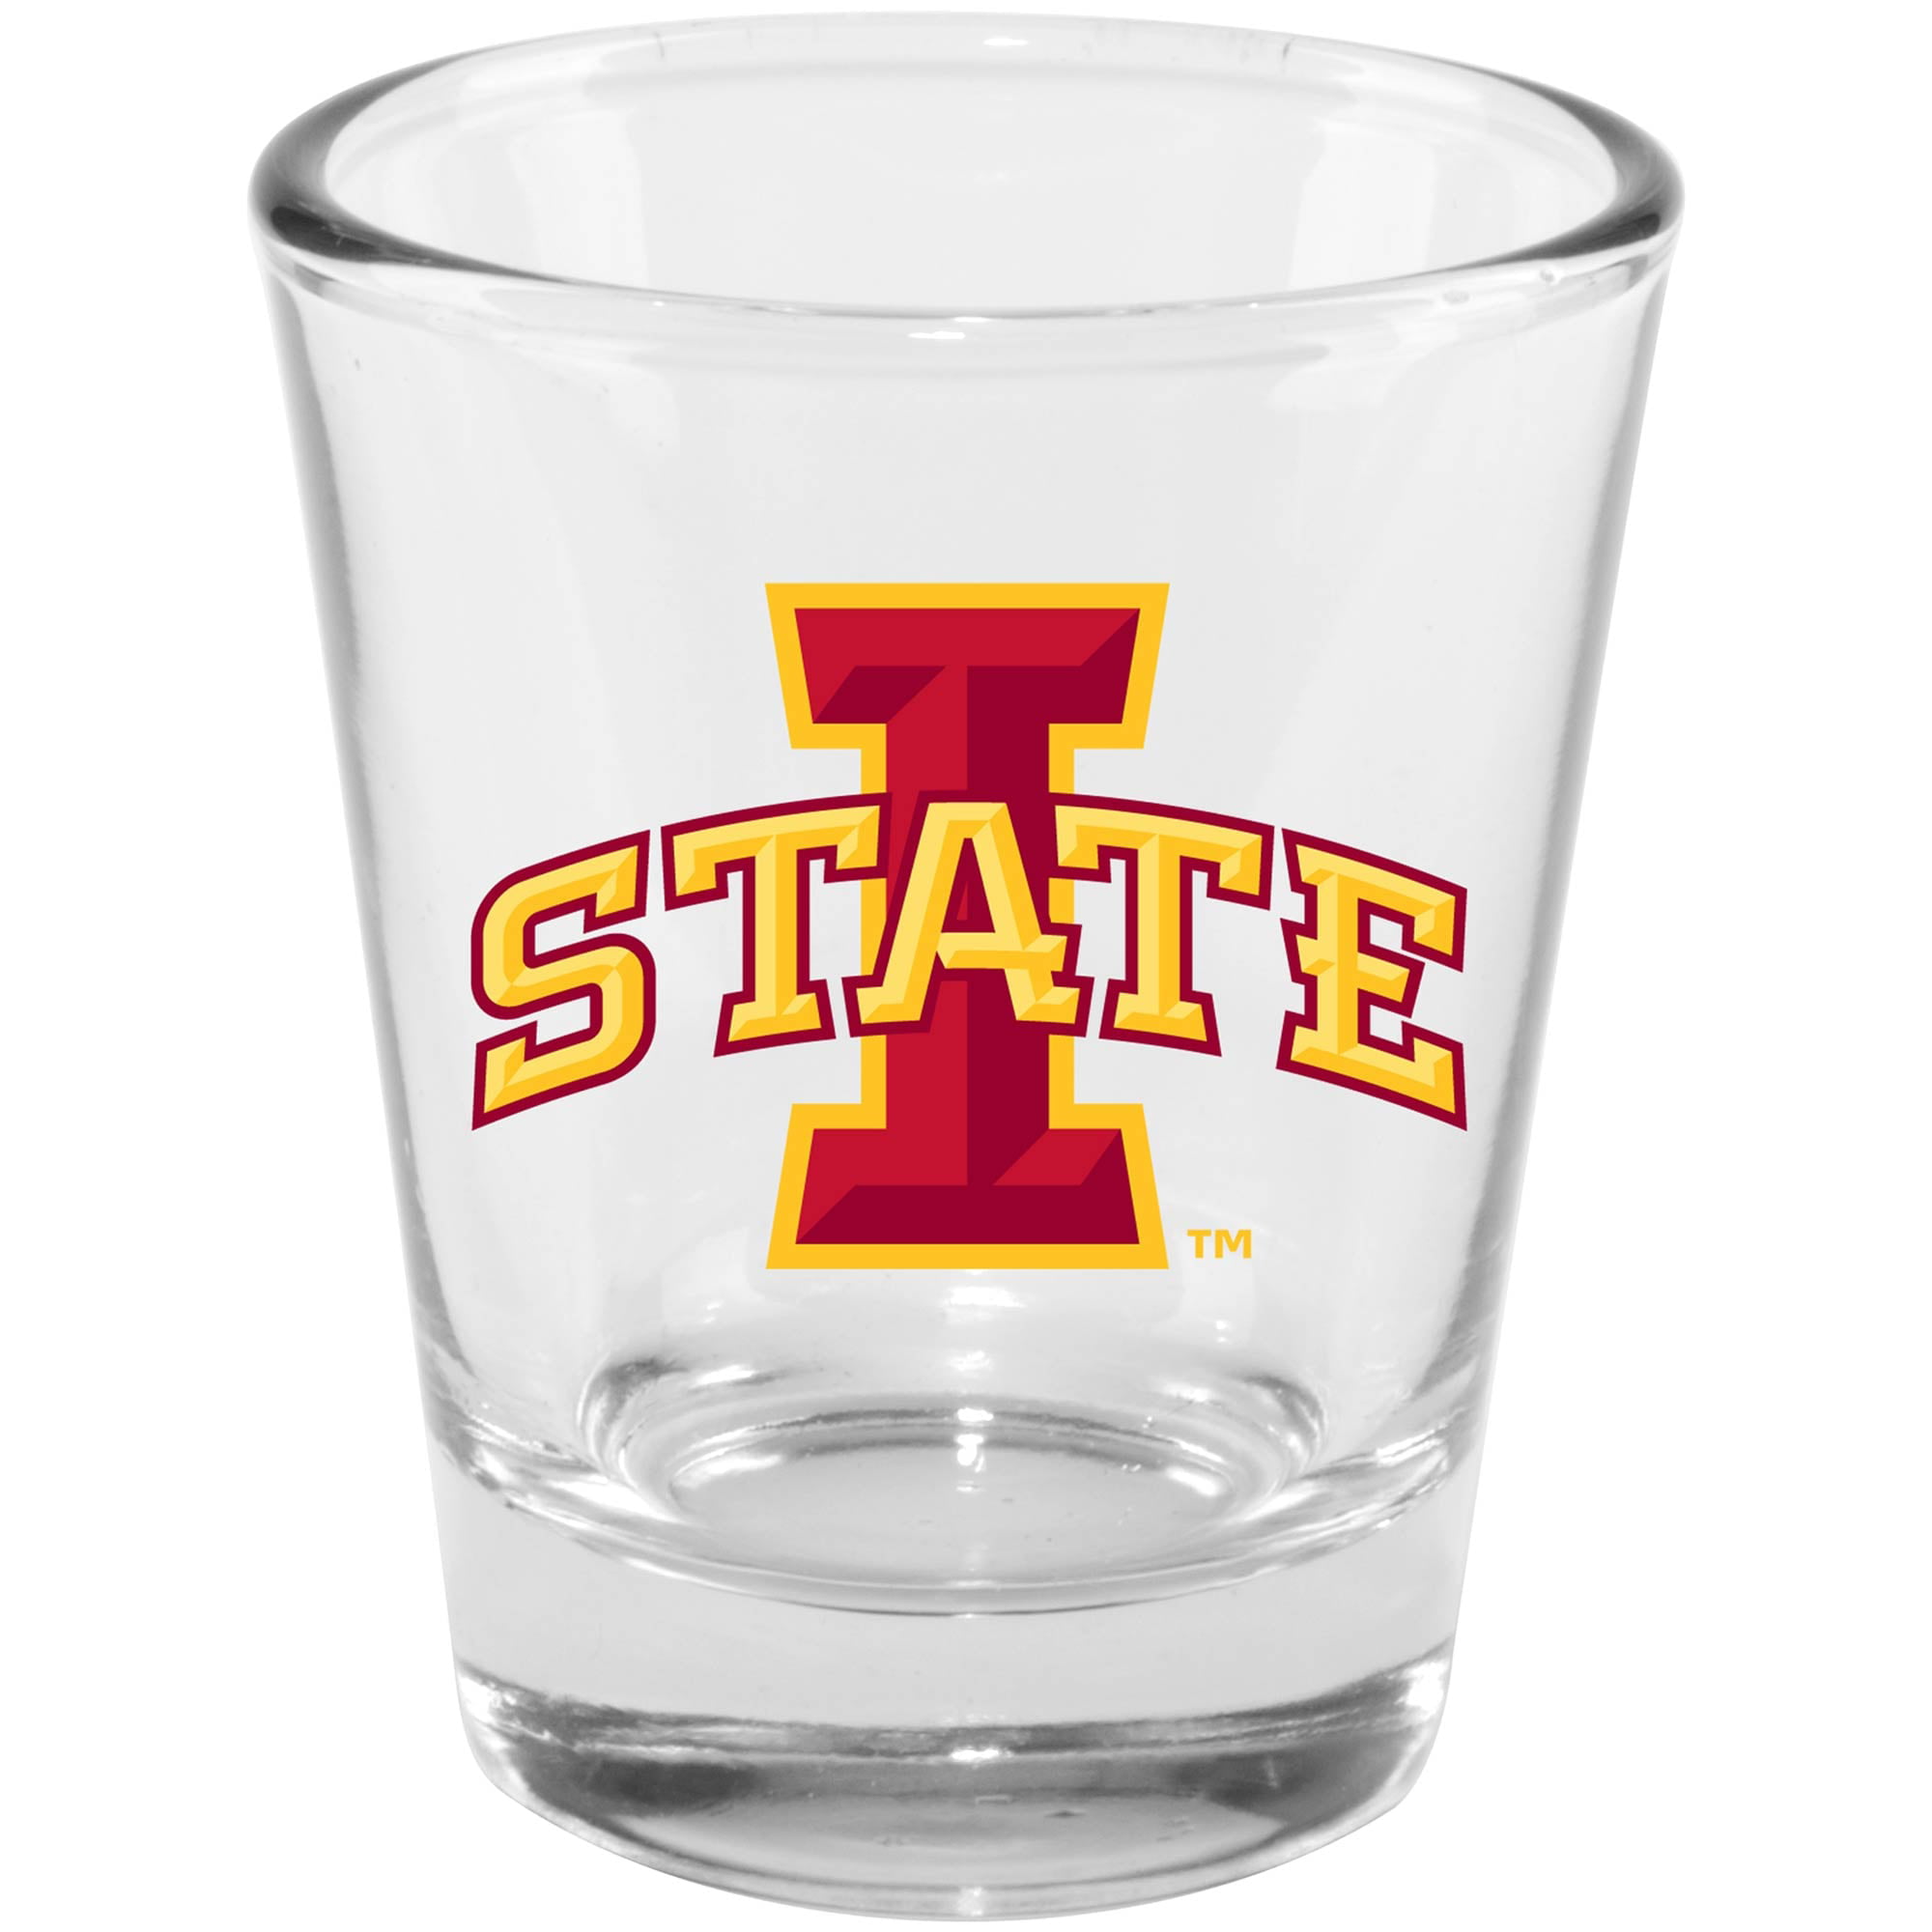 New with Tag Iowa State Cyclones College Football 16oz Pint Koozie 